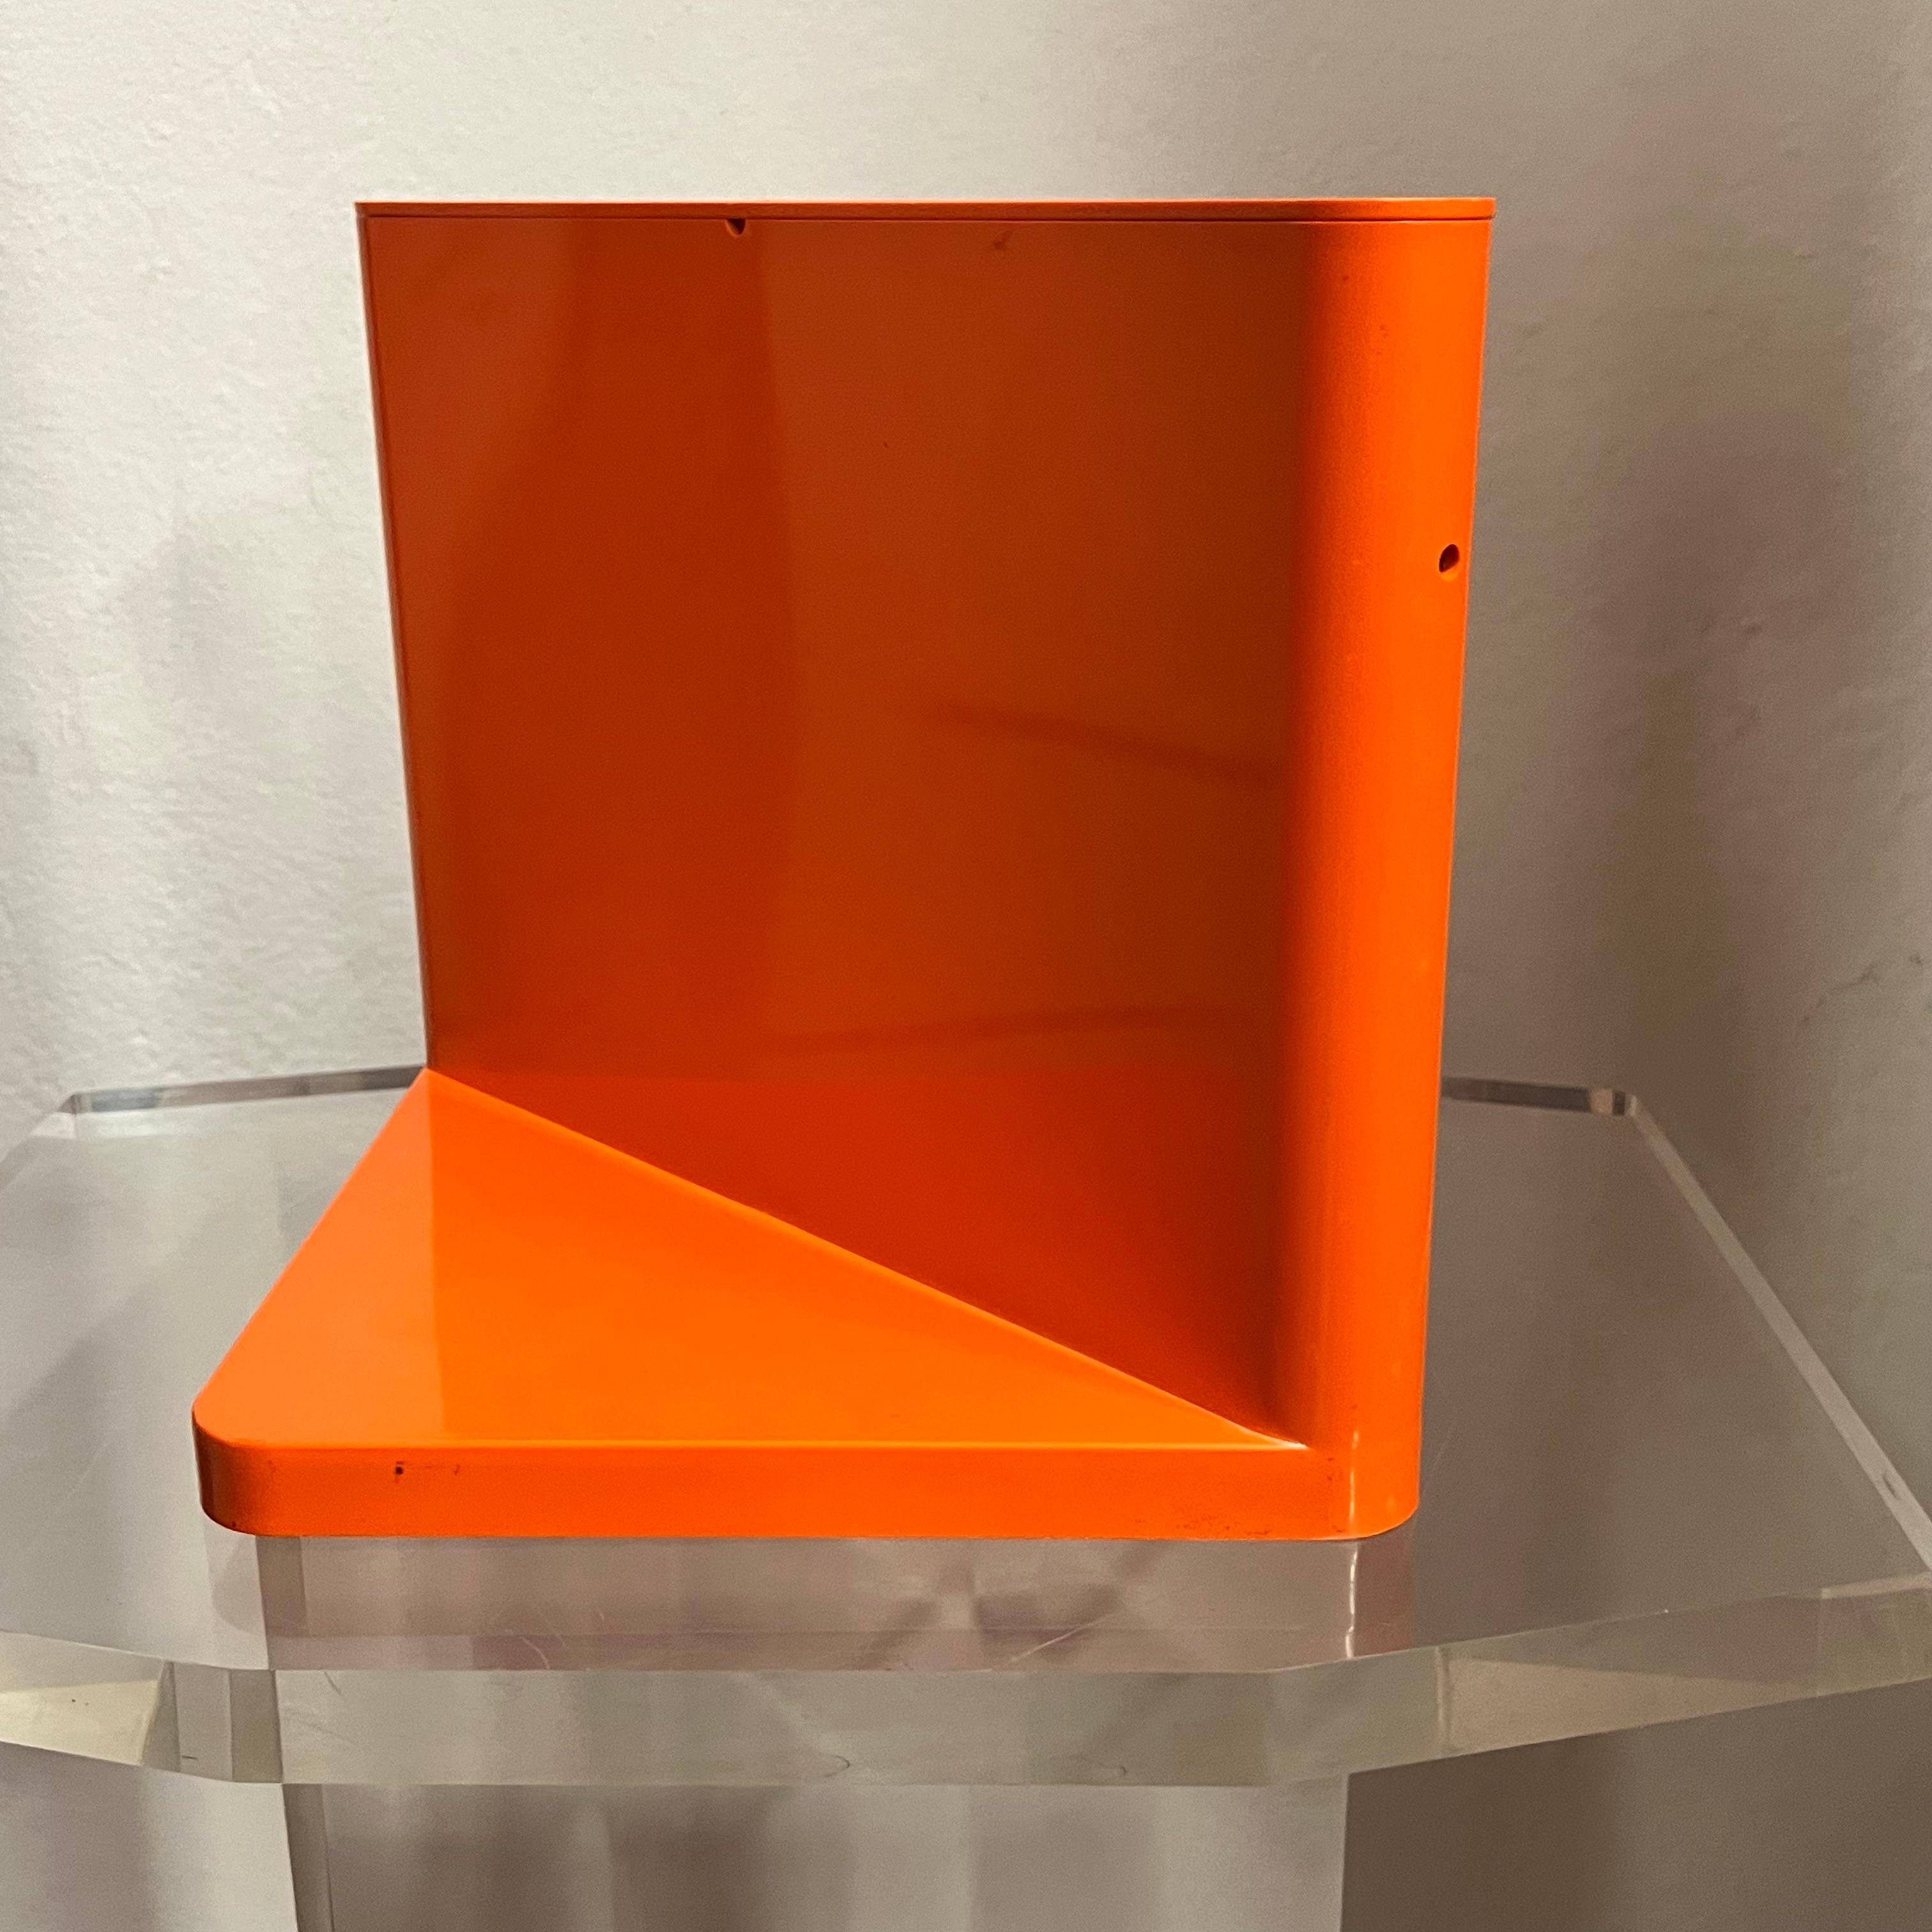 Rare and distinctive plastic vase, designed in the 1970s by Giotto Stoppino and produced by Kartell.
Its shape, which is typical in the designer's work, plans to accommodate 12 flowers in a row, one flower per hole.
The square base is divided into